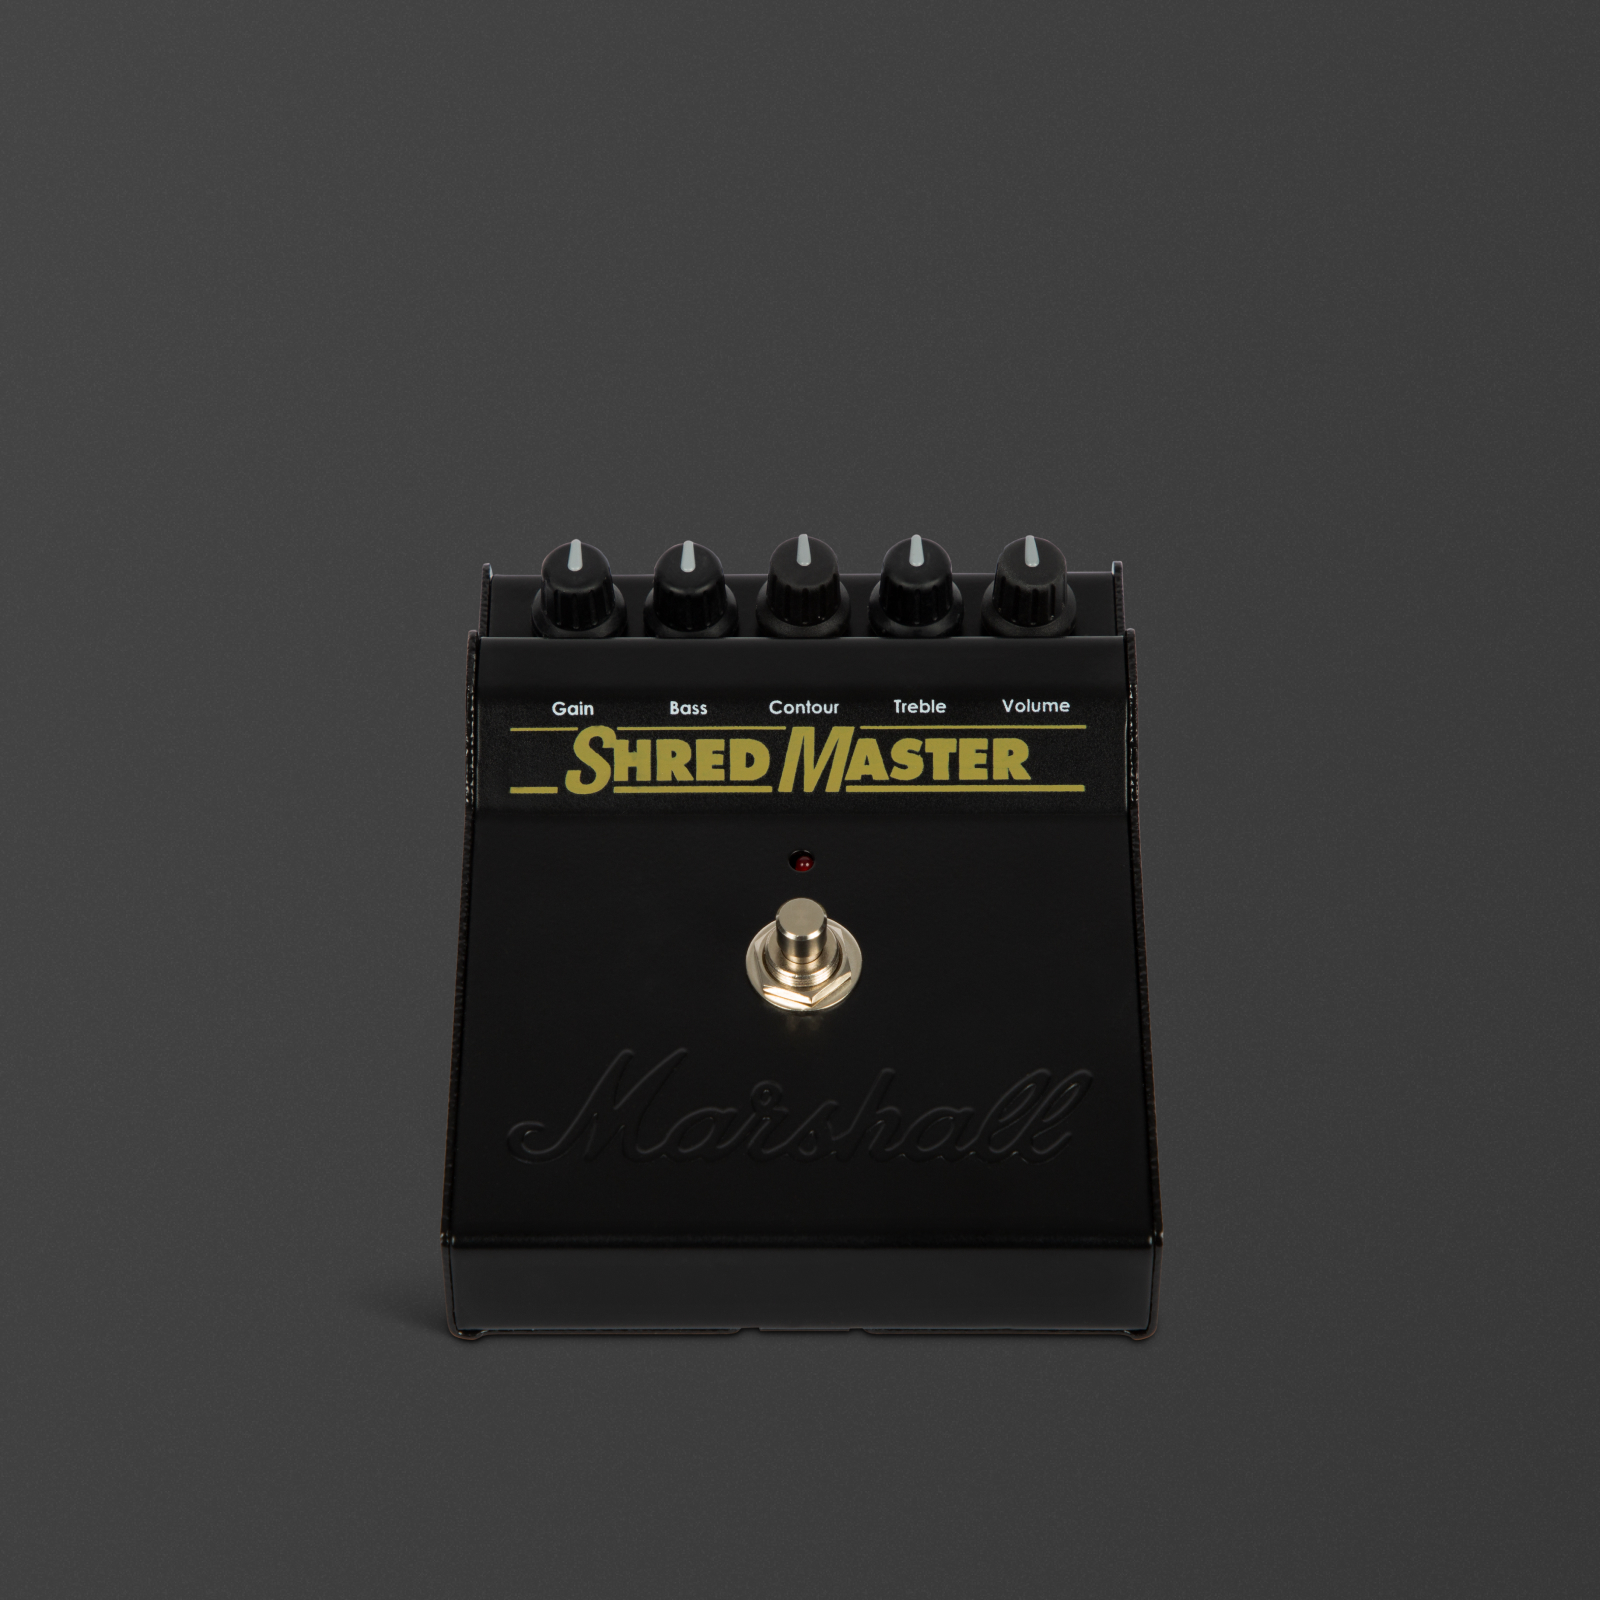 Black Shredmaster effects pedal to recreate the iconic sound of the original.